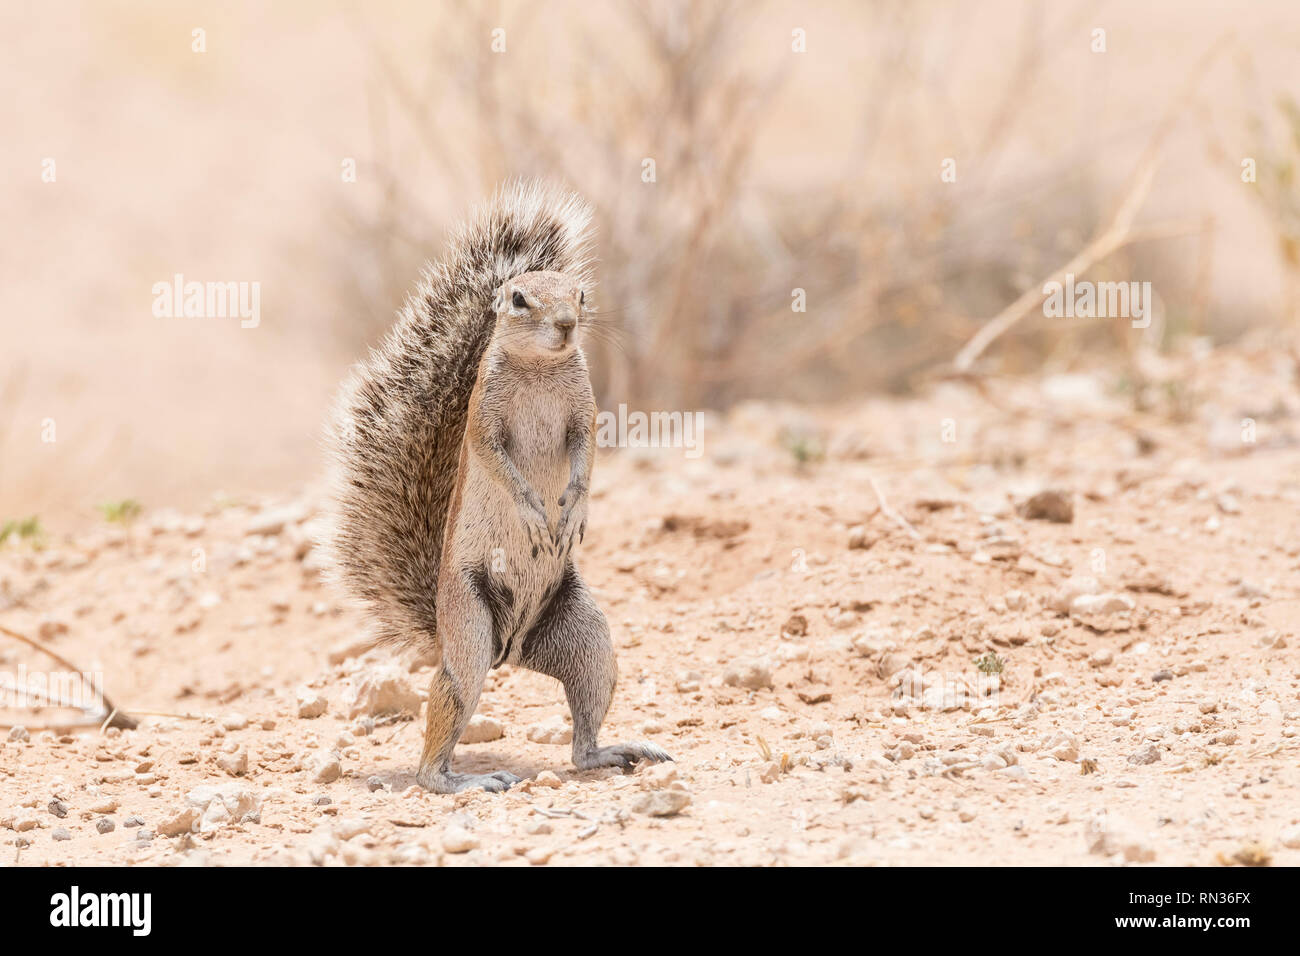 Cape Ground Squirrel,  Xerus inauris, Kgalagadi Transfrontier Park, Northern Cape, South Africa. Endemic terrestrial rodent standing upright Stock Photo